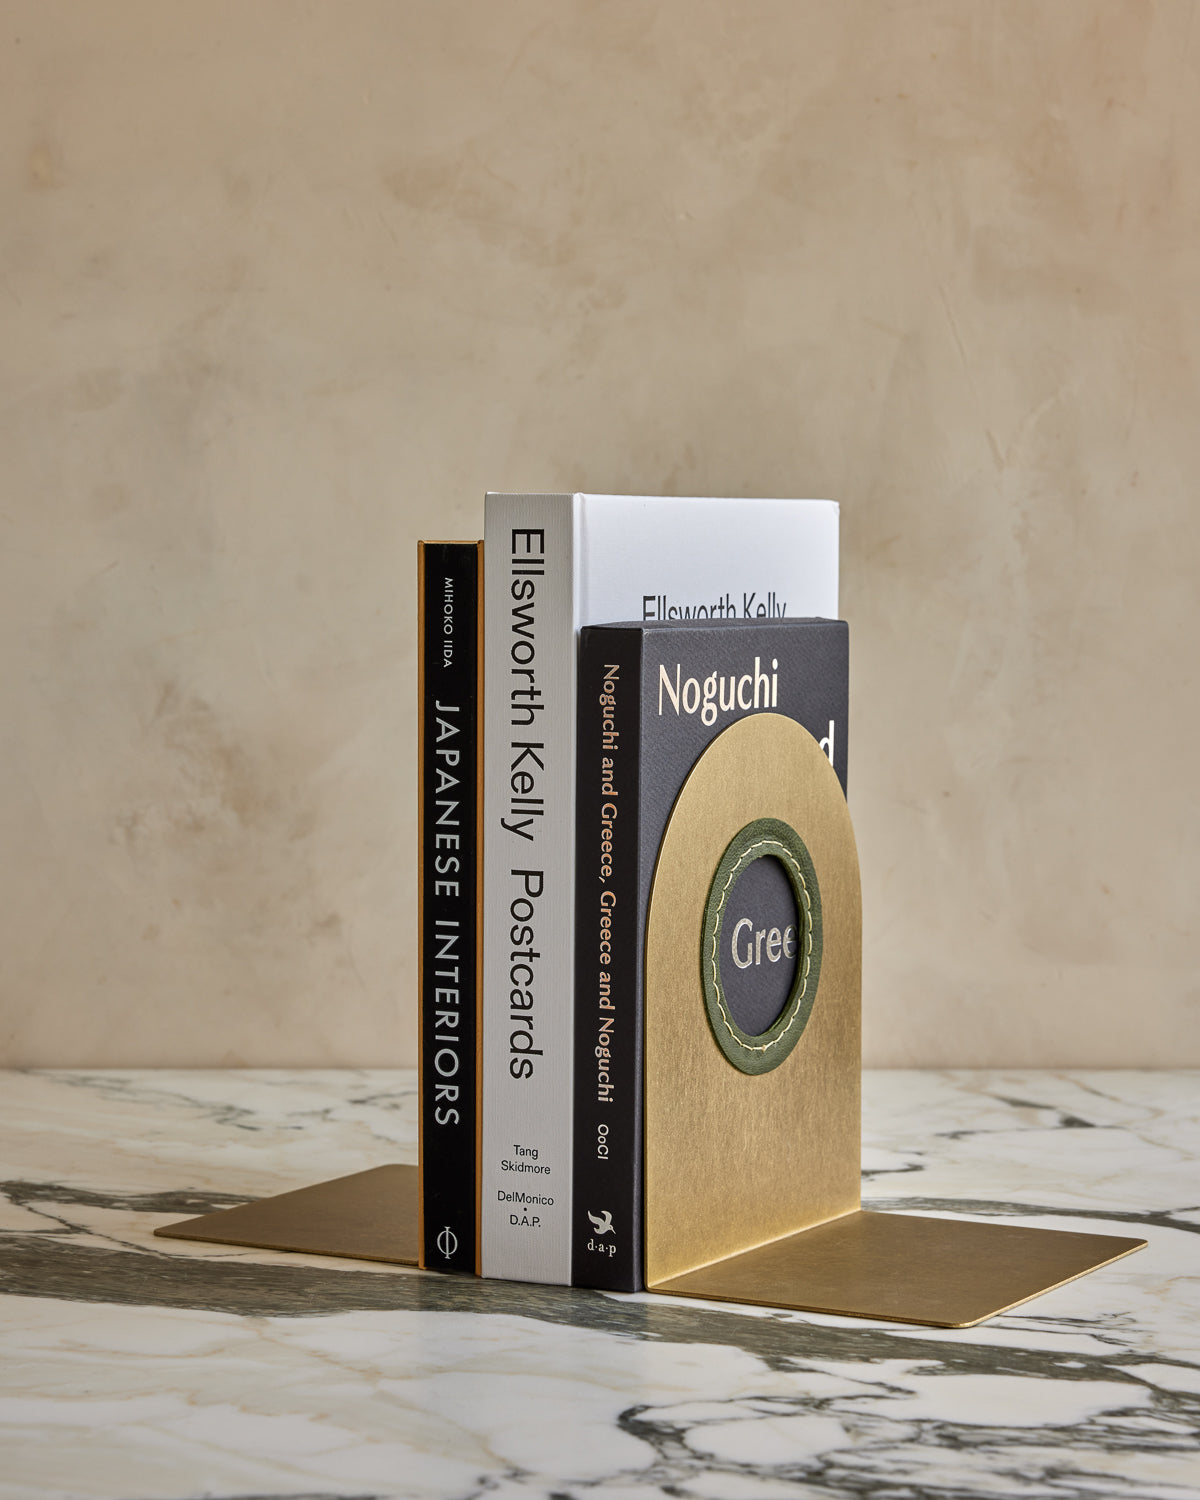 Spencer Brass and Leather Bookends